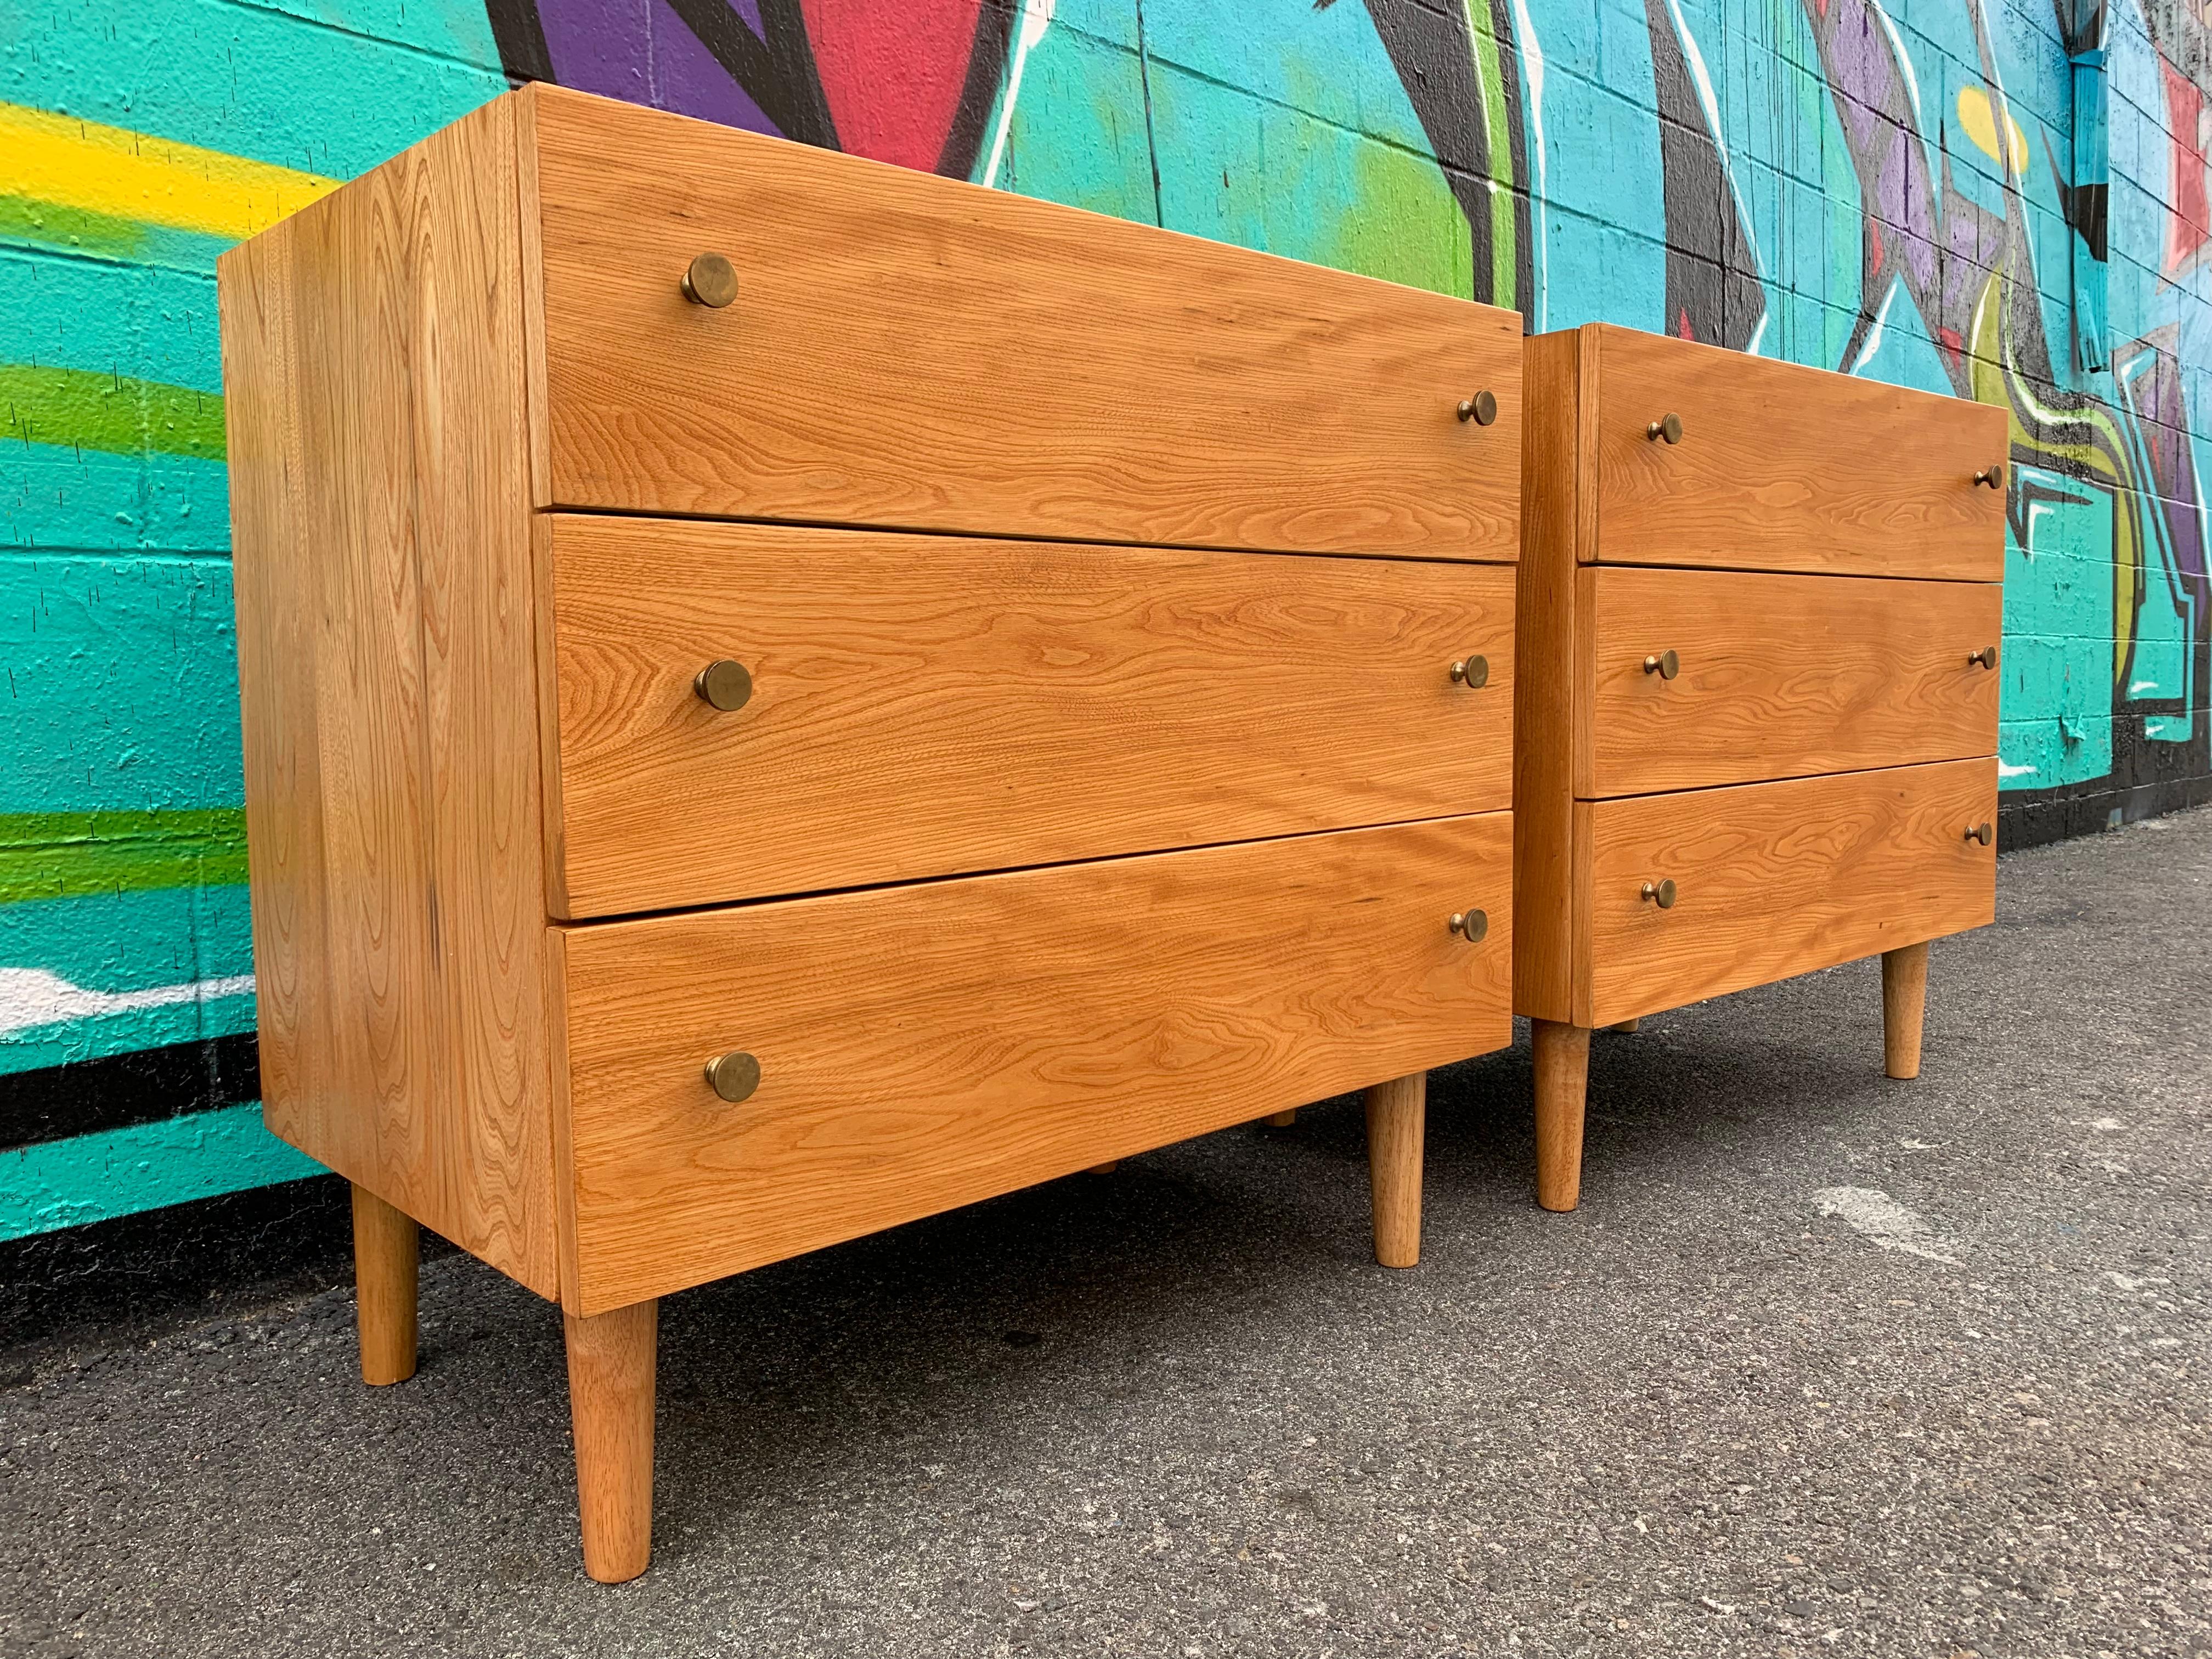 A pair of sleek midcentury chest of drawers by Milo Baughman for Thayer Coggin solid oakwood and brass hardware on three drawers. Excellent craftsmanship with original label.